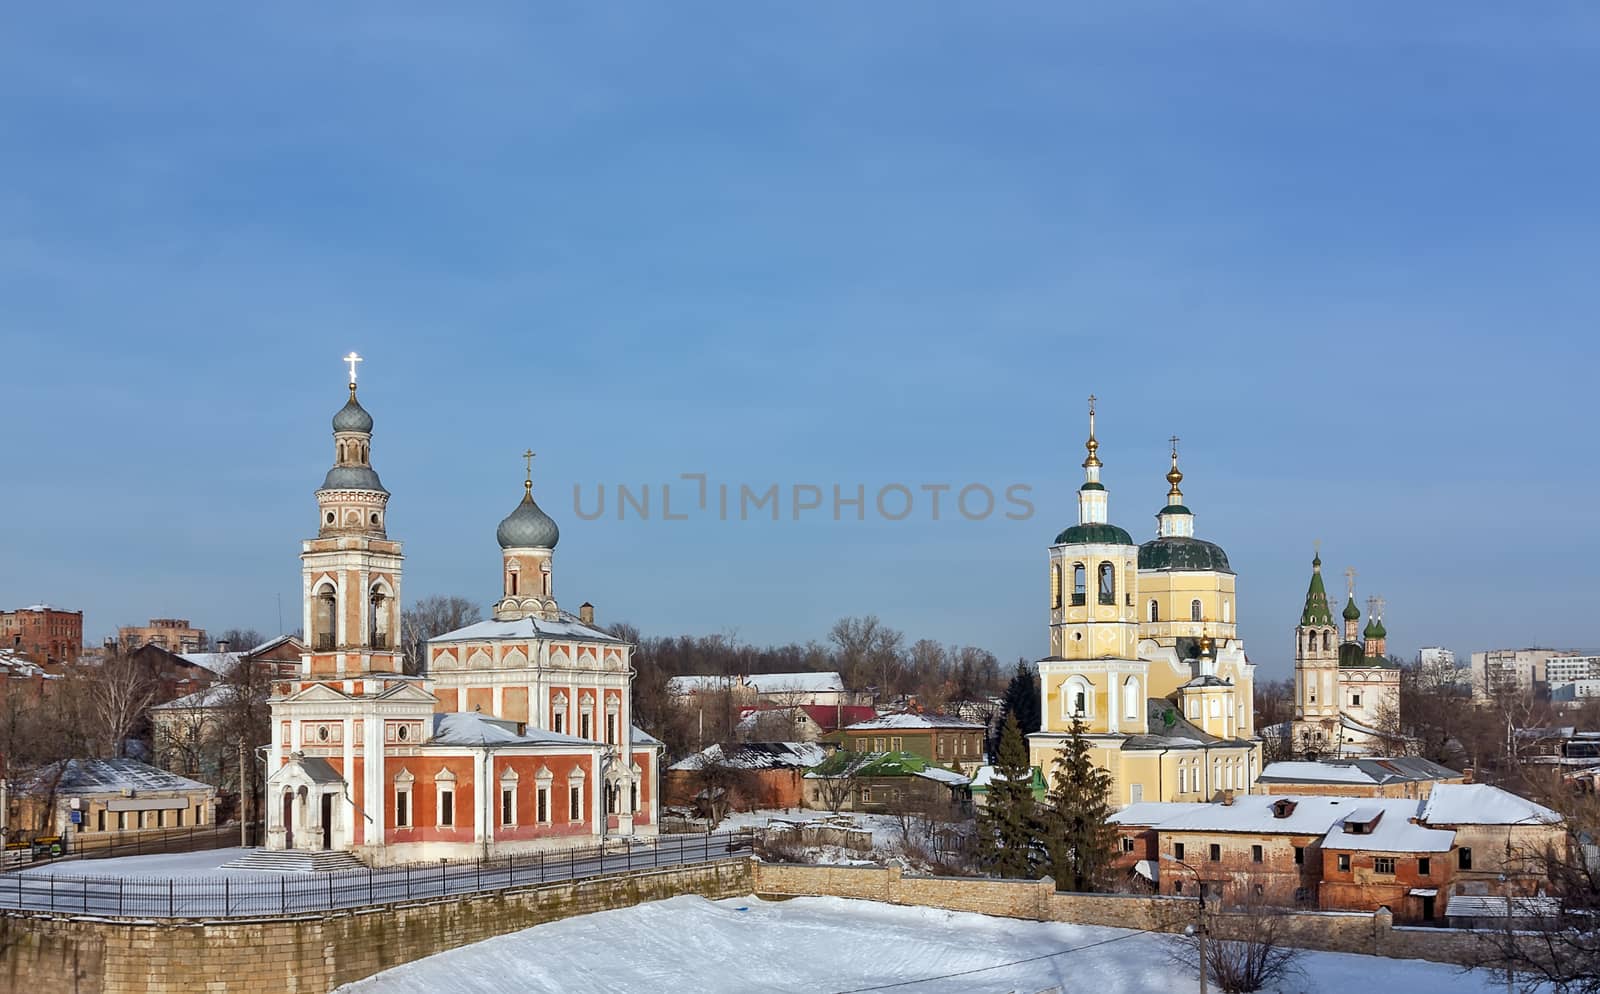 Ensemble of churches in the historic centre of the town of Serpukhov